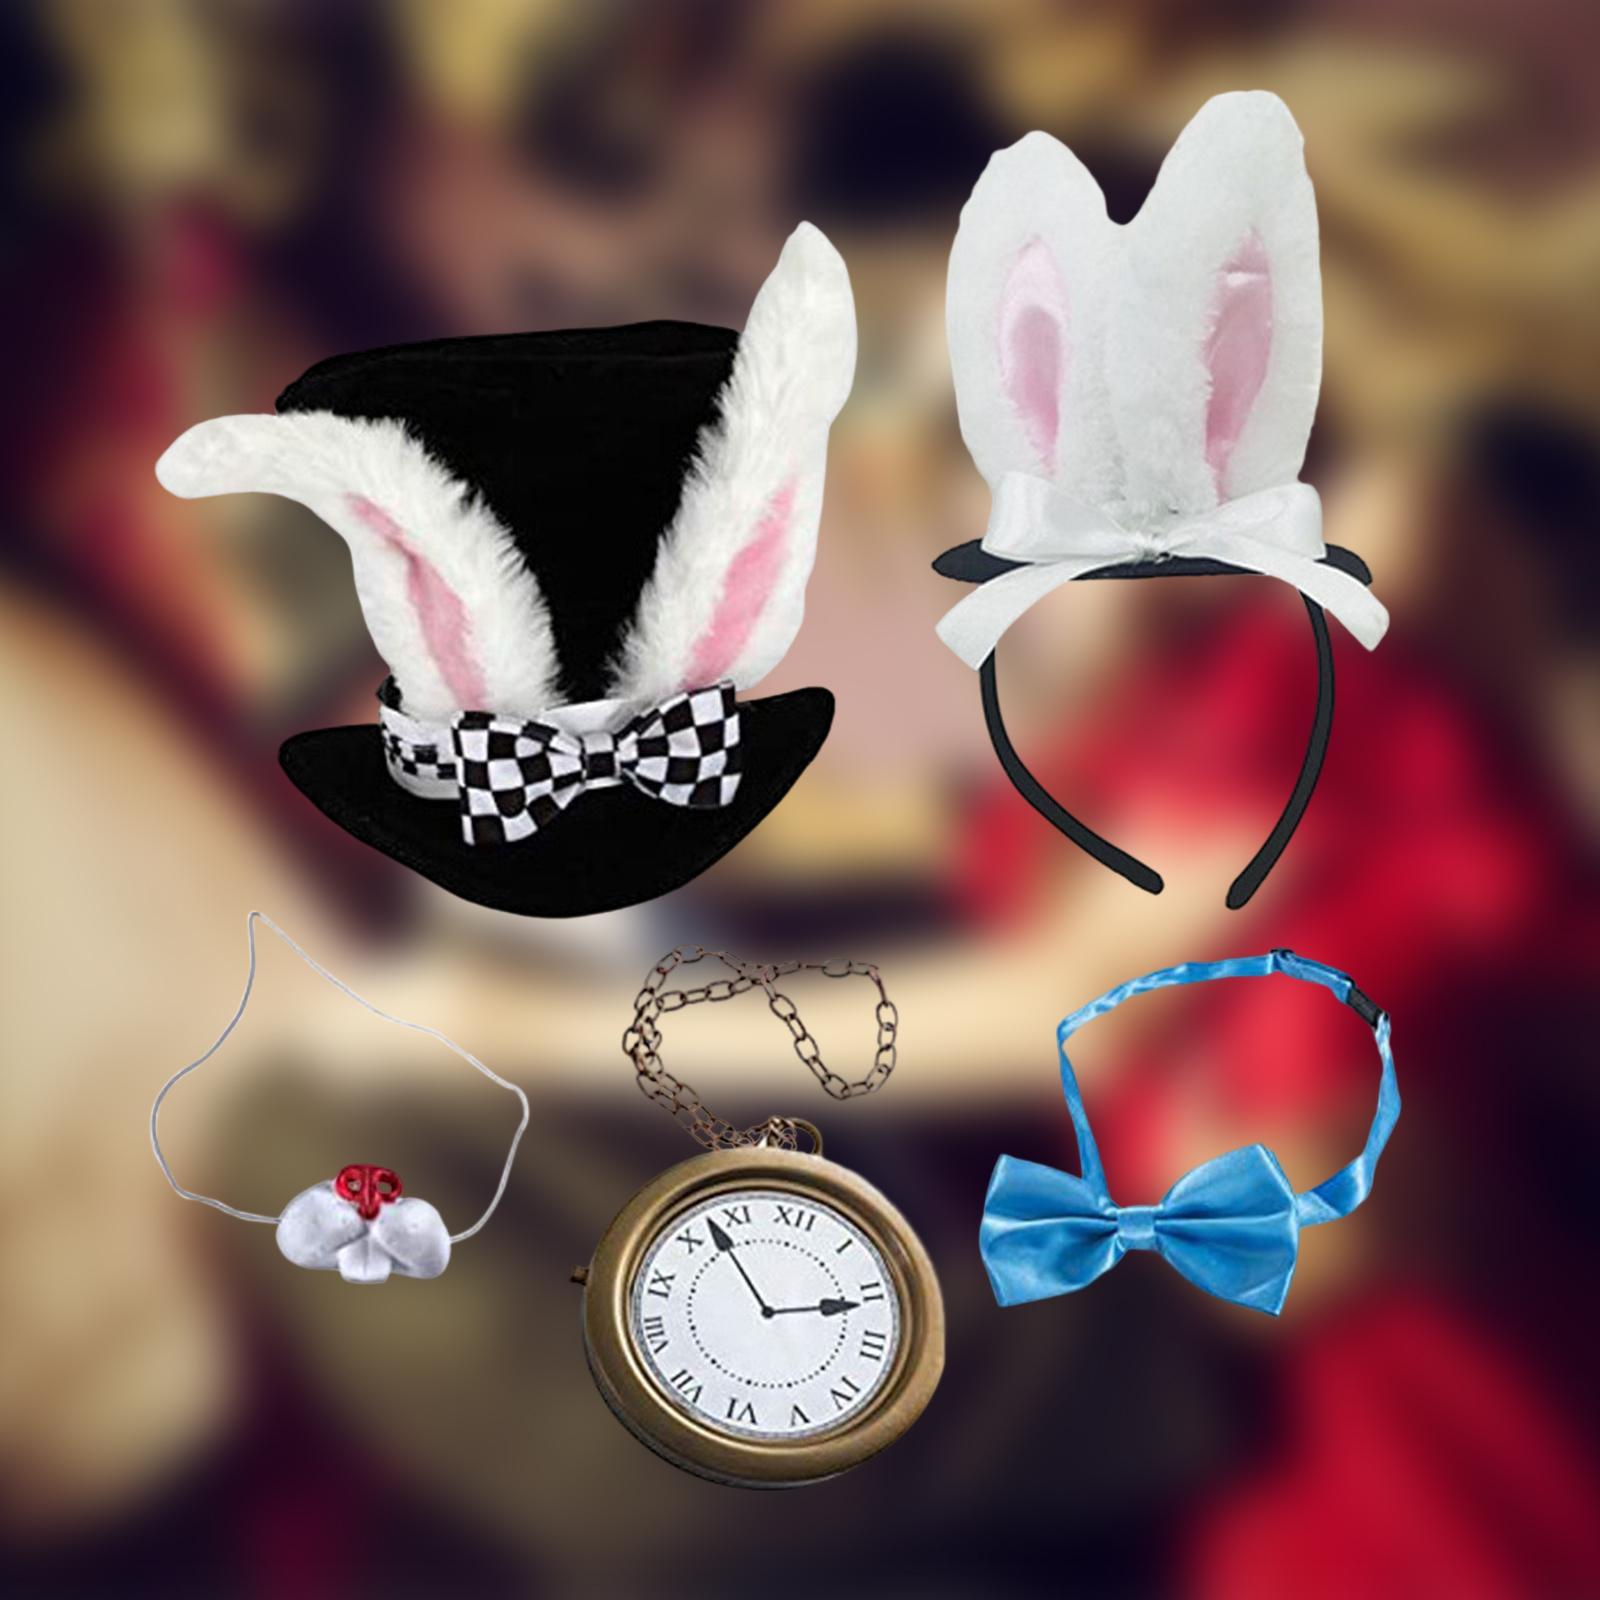 Easter White Rabbit Costume Pocket Watch Bunny Dress up Accessories Nose